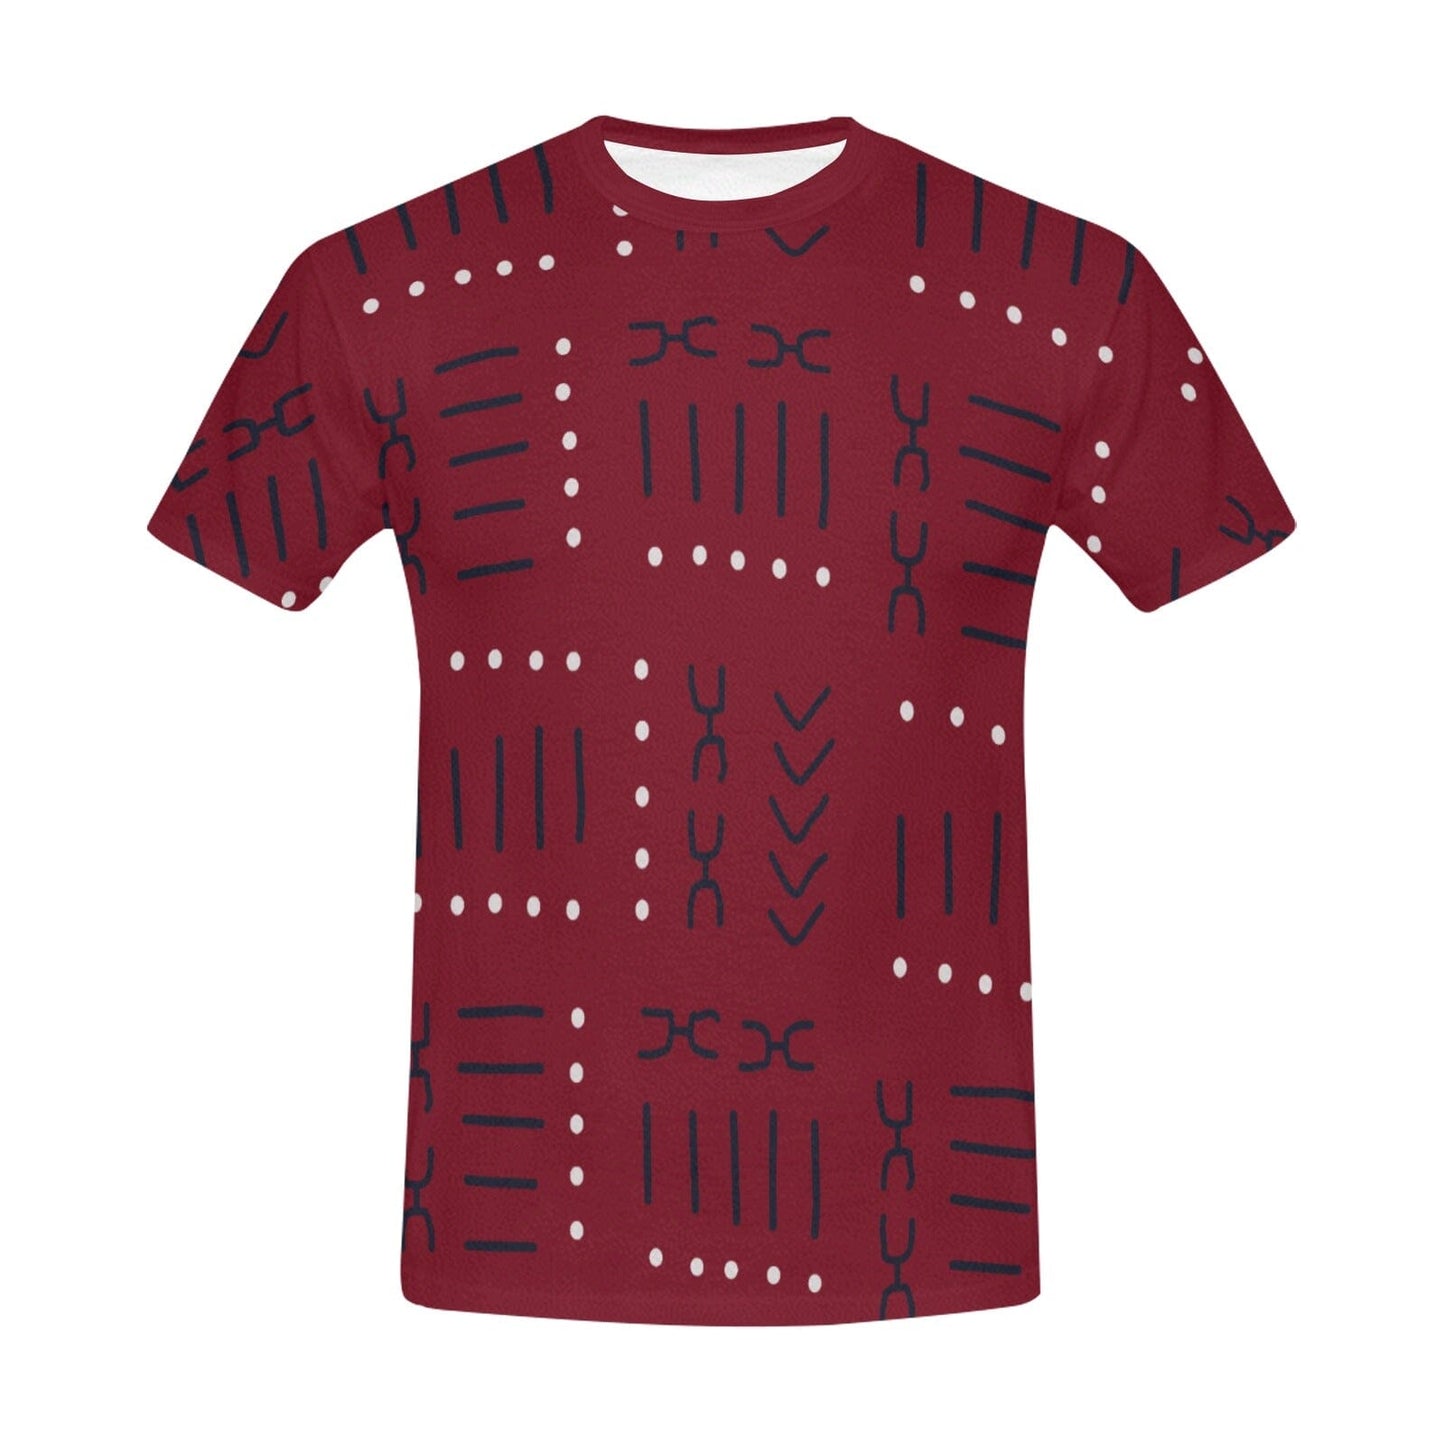 African Print shirt styles for guys Red T-Shirt Inkedjoy Red S 